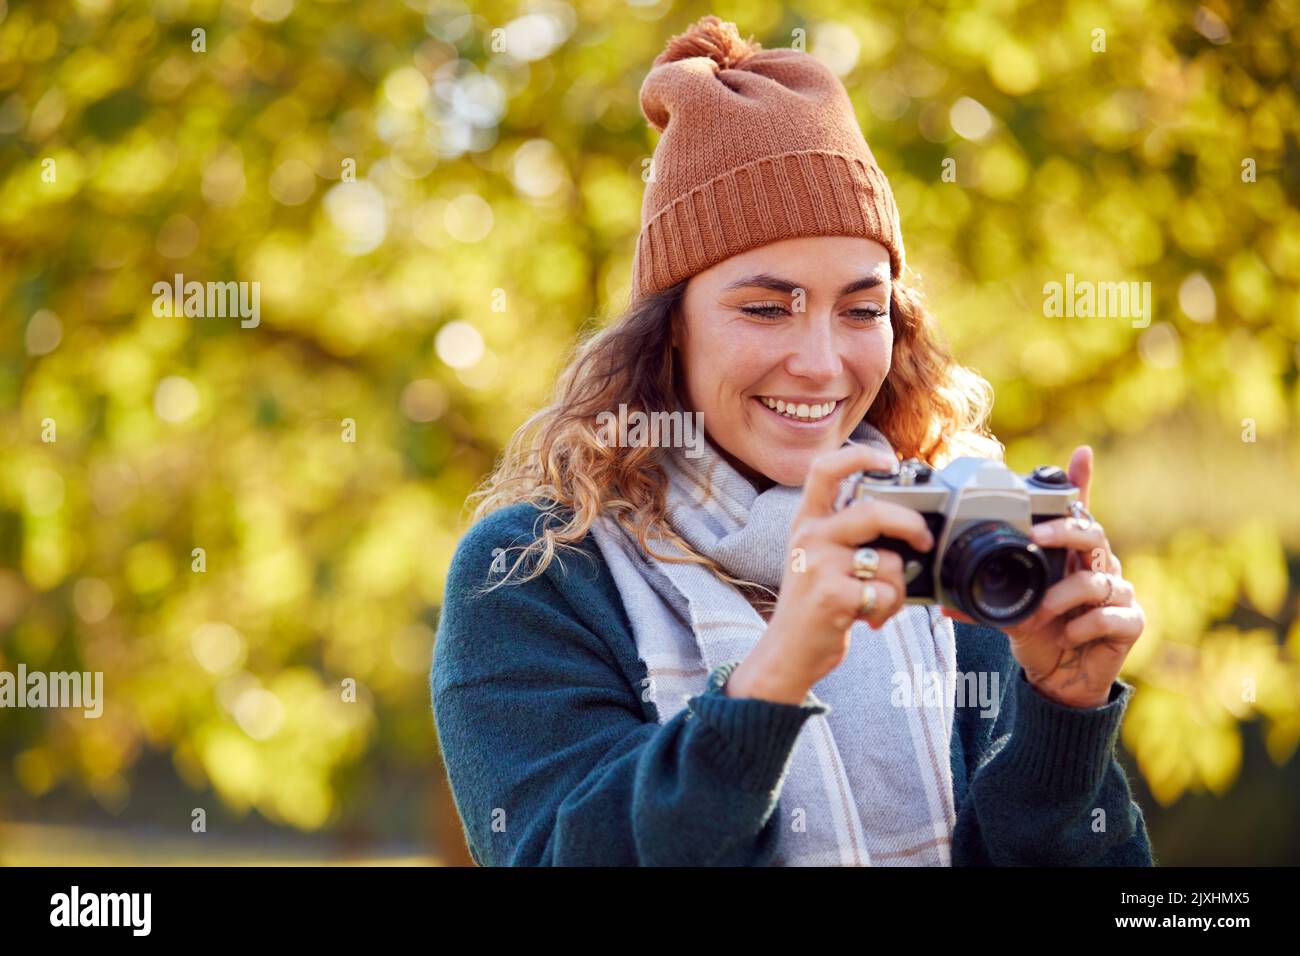 Woman In Autumn Countryside Taking Photo On Retro Style Digital Camera To Post To Social Media Stock Photo